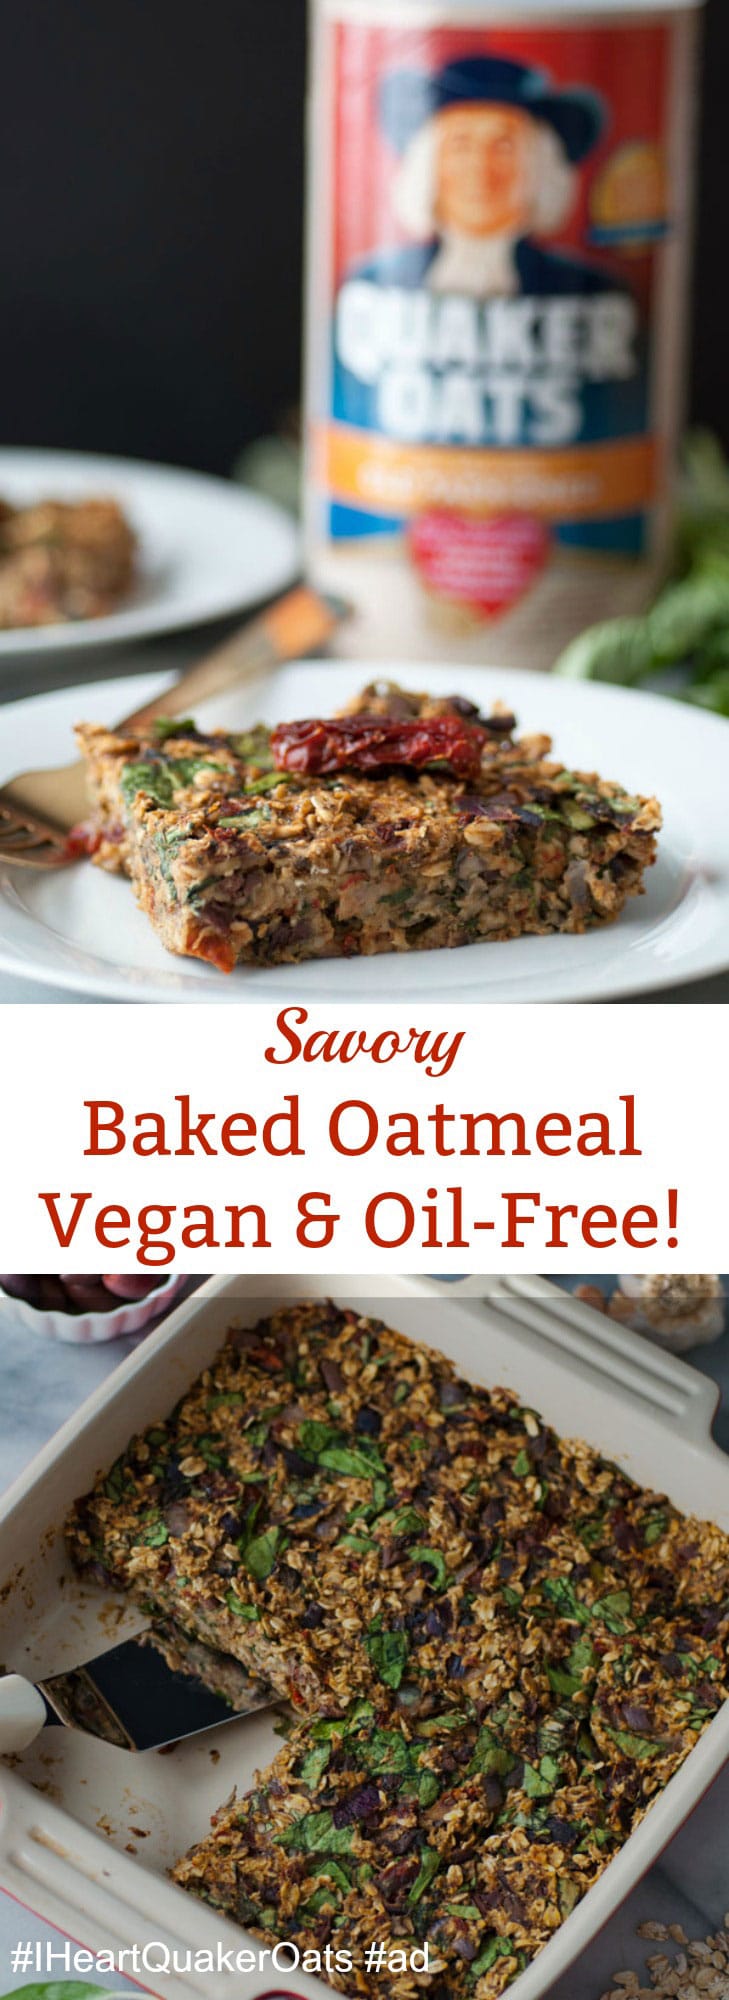 Savory baked oatmeal filled with spinach, Kalamata olives, sun-dried tomatoes, fresh herbs, and more! Healthy and delicious!